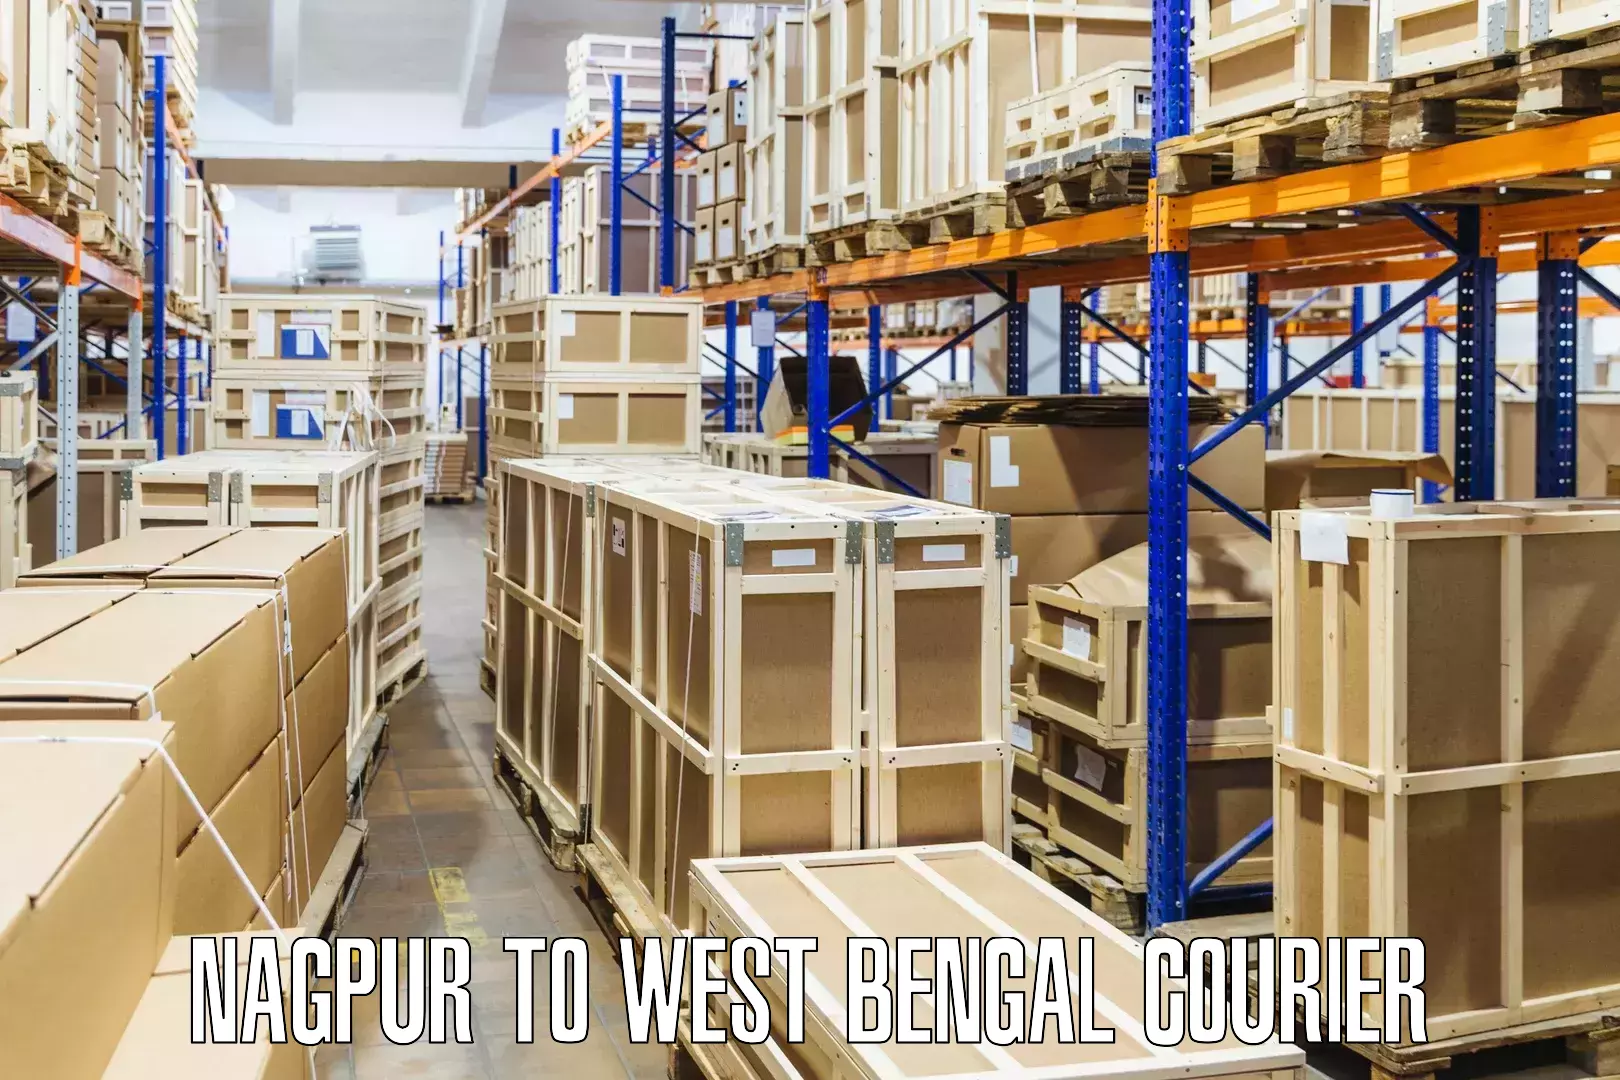 Professional courier handling Nagpur to West Bengal